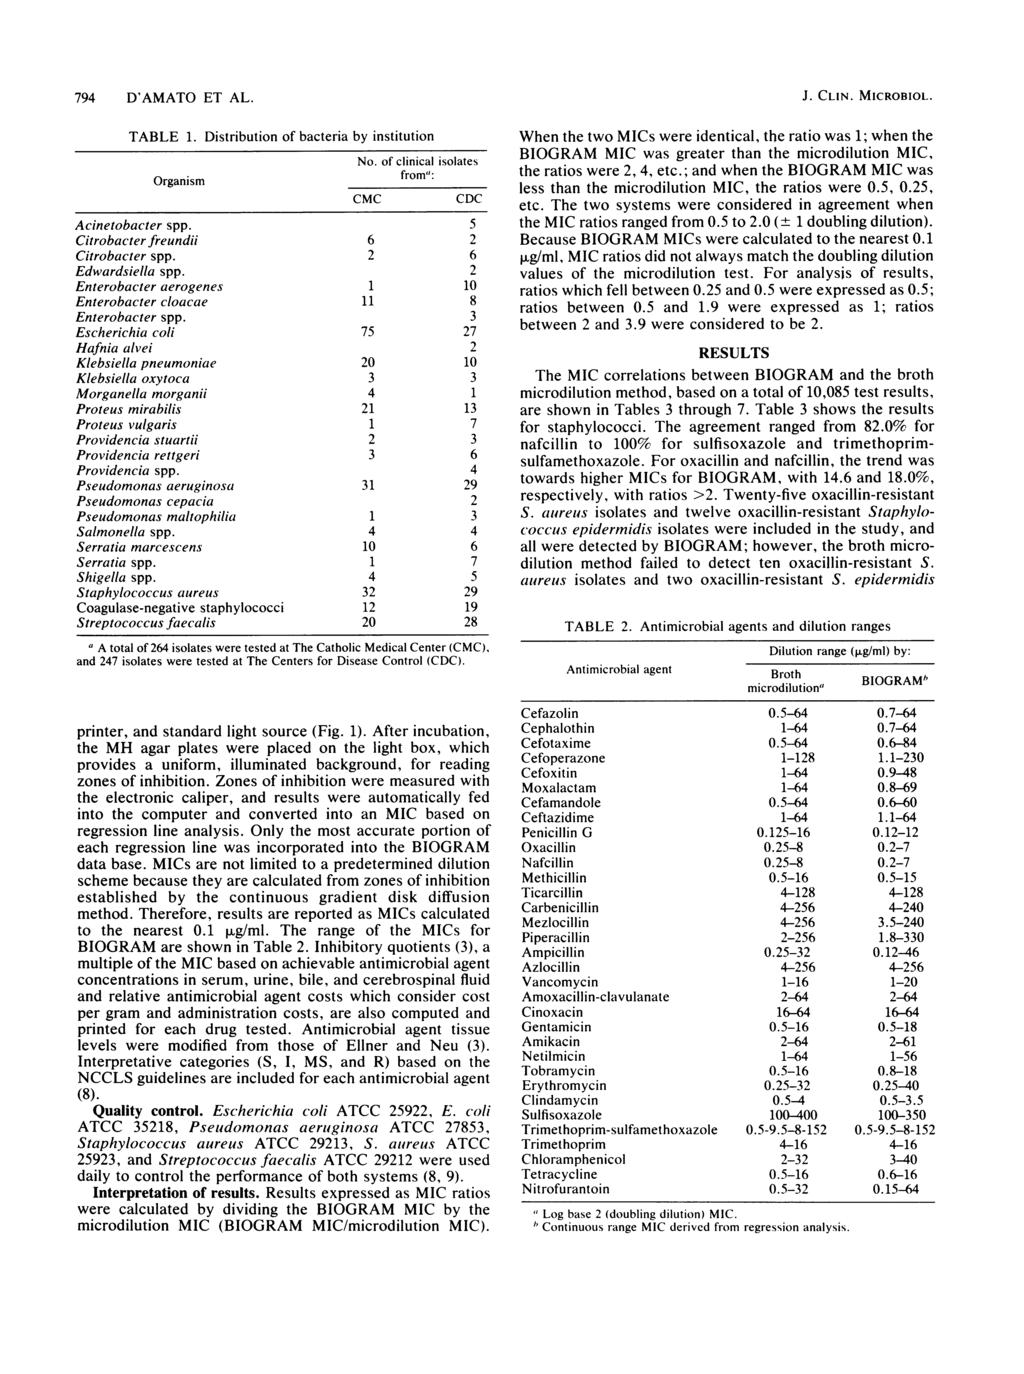 794 D'AMATO ET AL. TABLE 1. Organism Distribution of bacteria by institution No. of clinical isolates CMC from": CDC Acinetobacter spp. 5 Citrobacter freundii 6 2 Citrobacter spp.